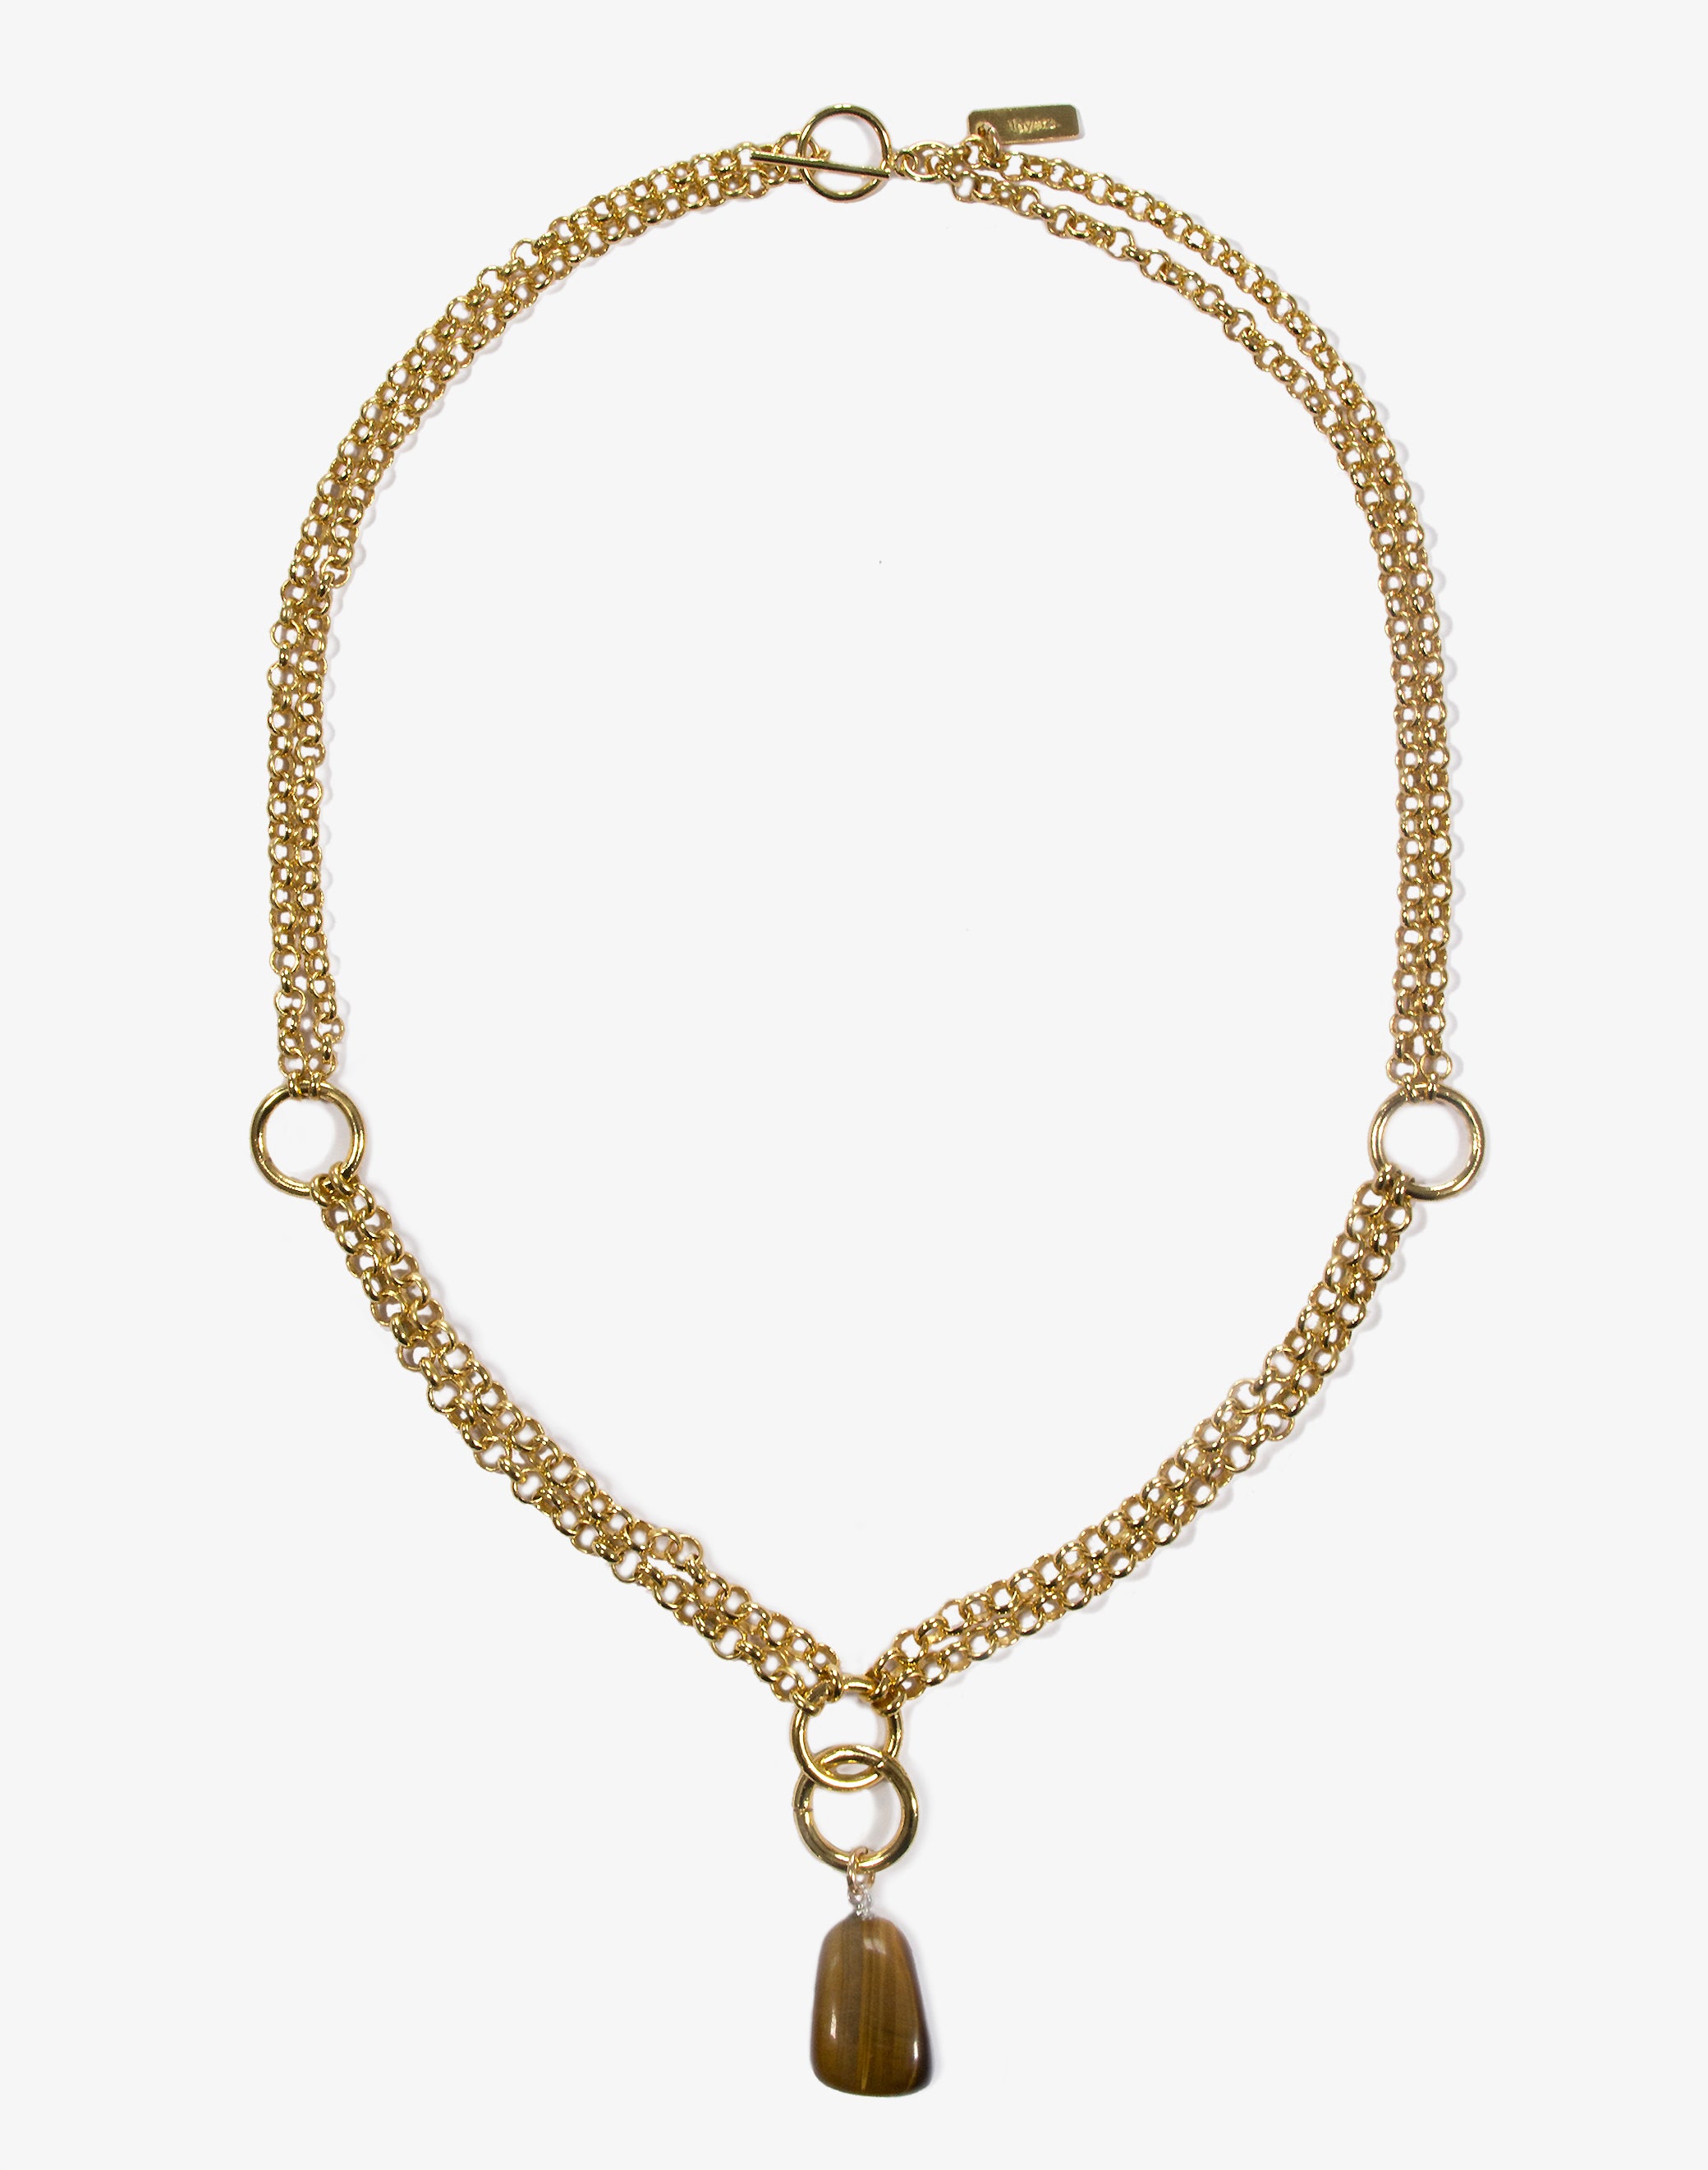 llayers Gold women minimal long chain choker necklace with stones Hancrafted in Brooklyn New York